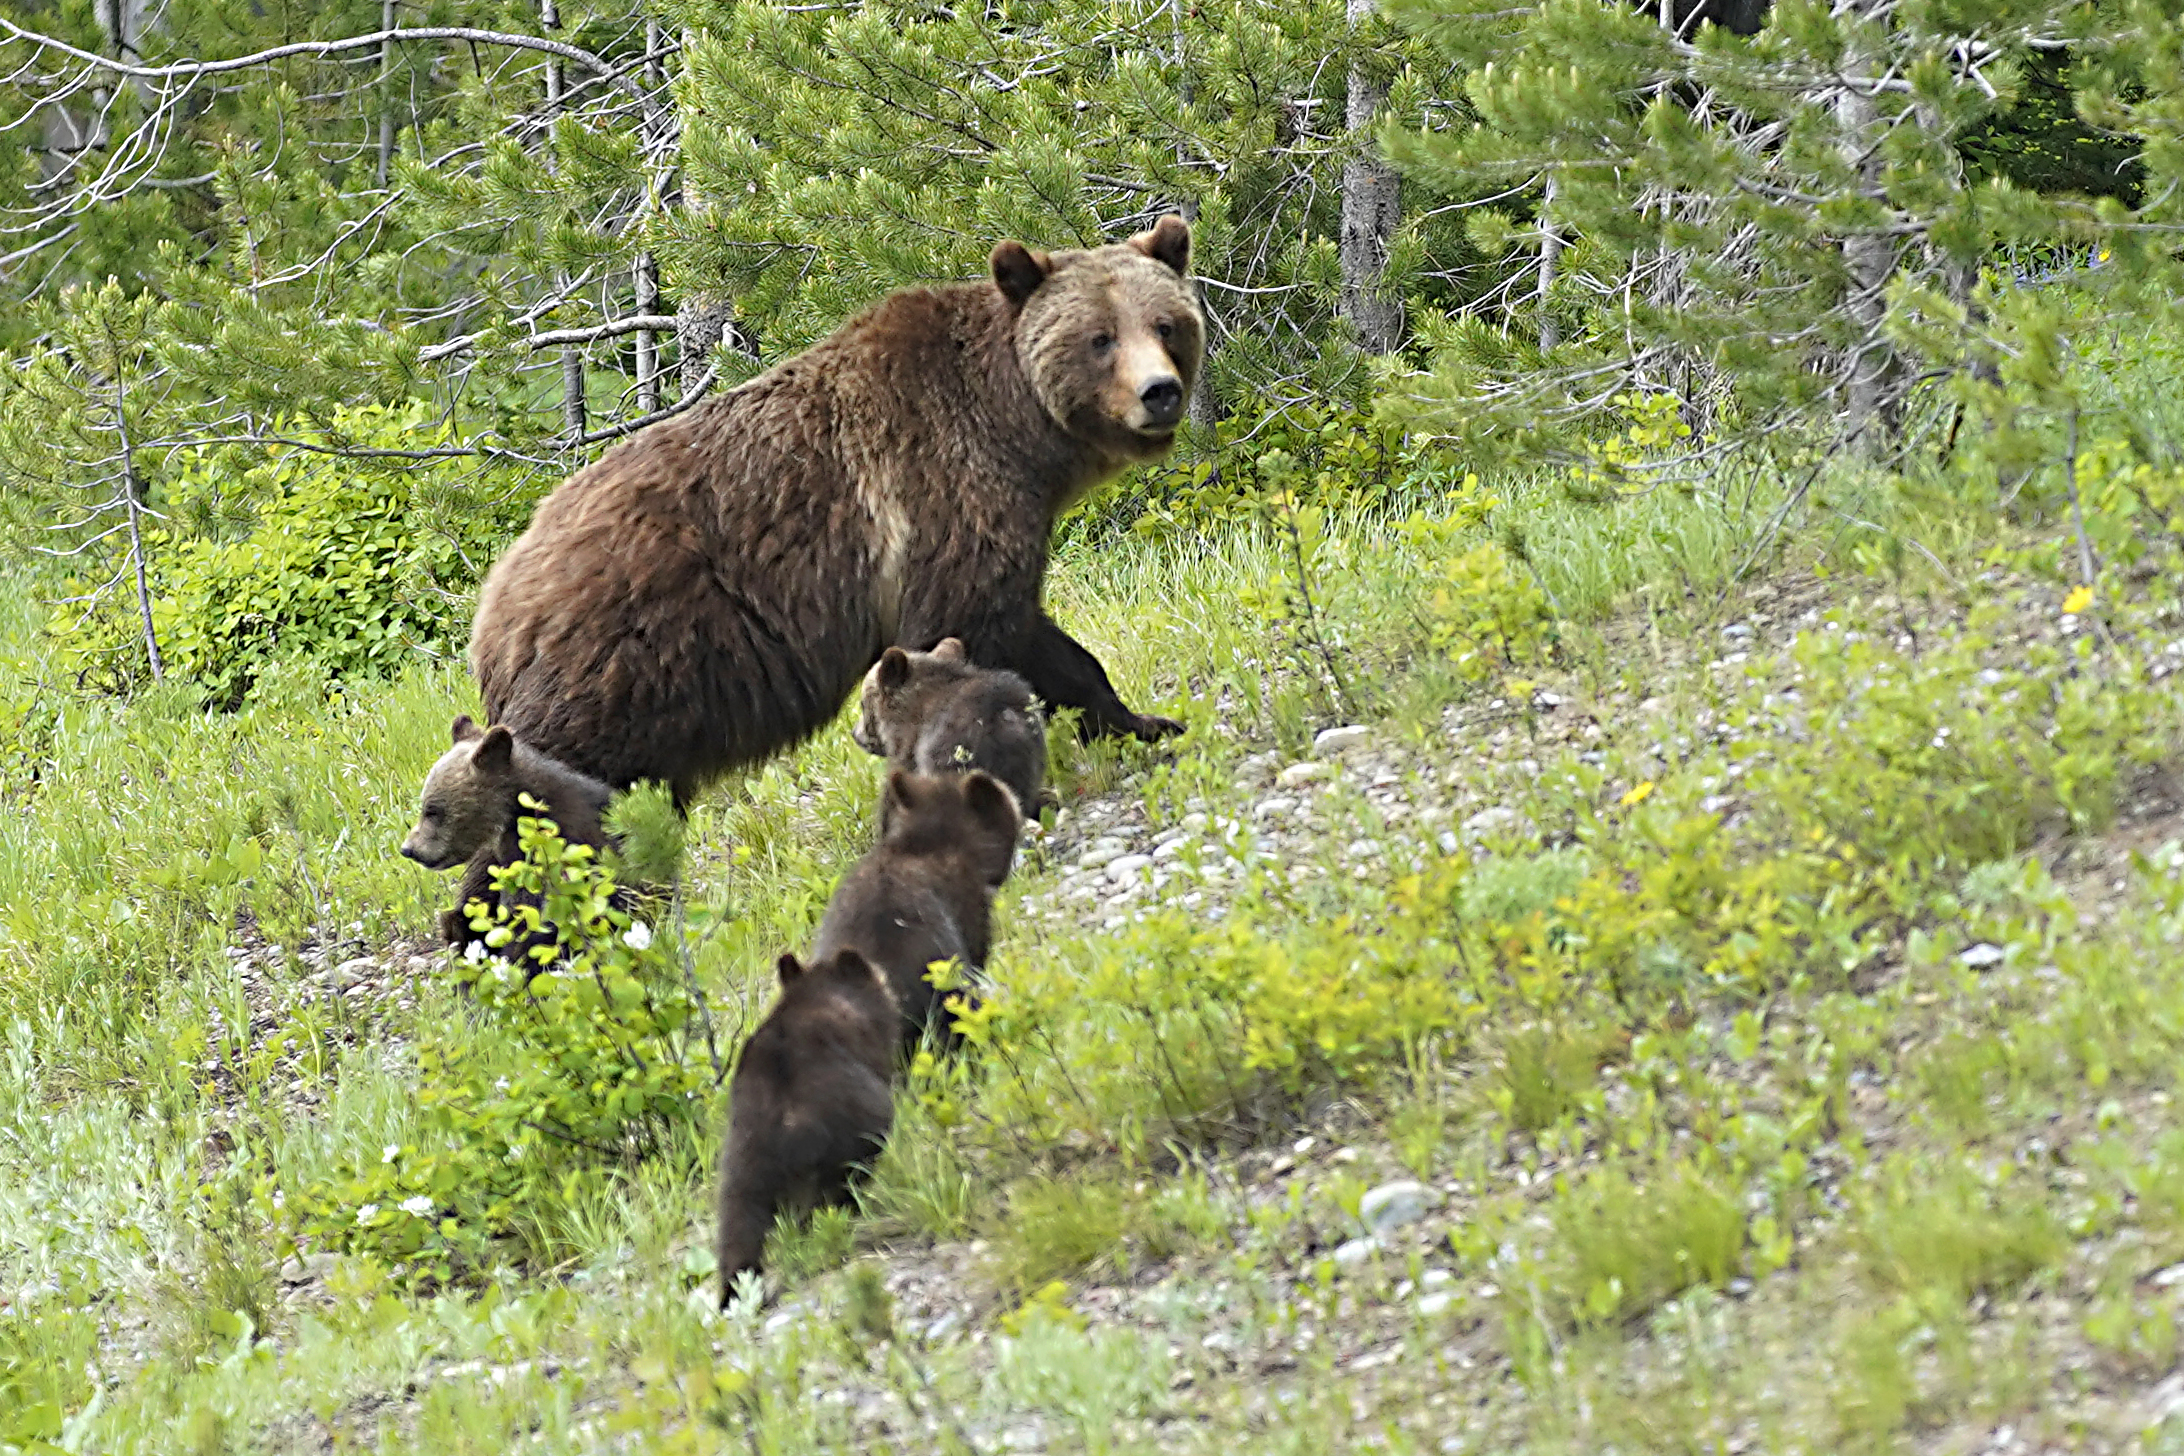 Woman killed by grizzly bear while camping in Montana